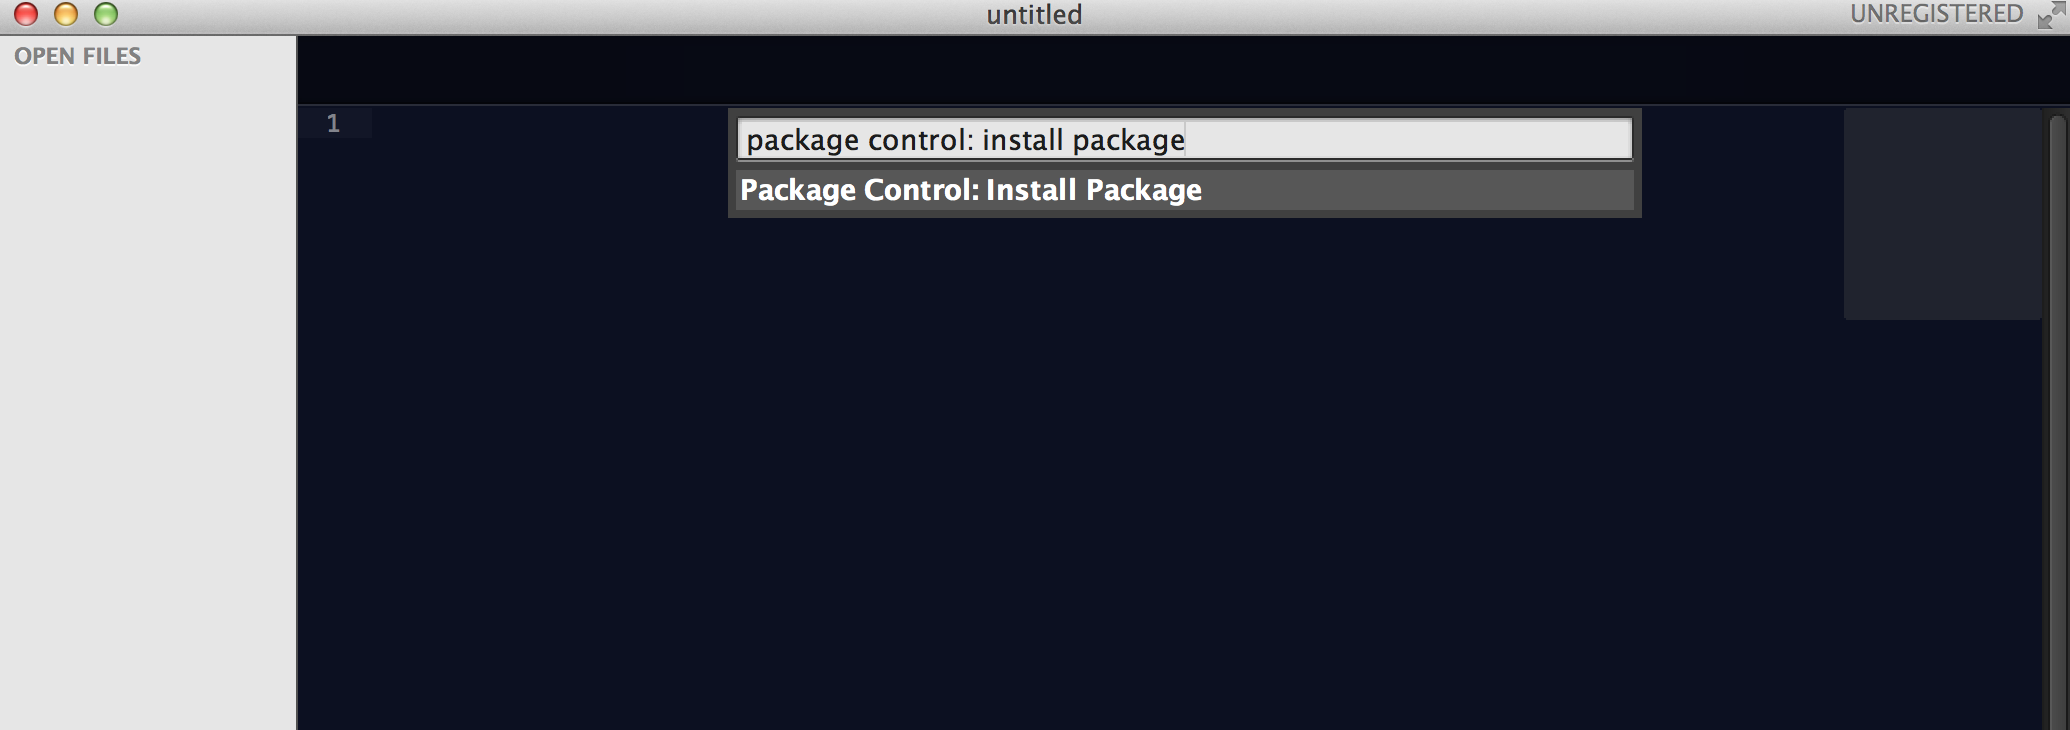 package control install package instalar